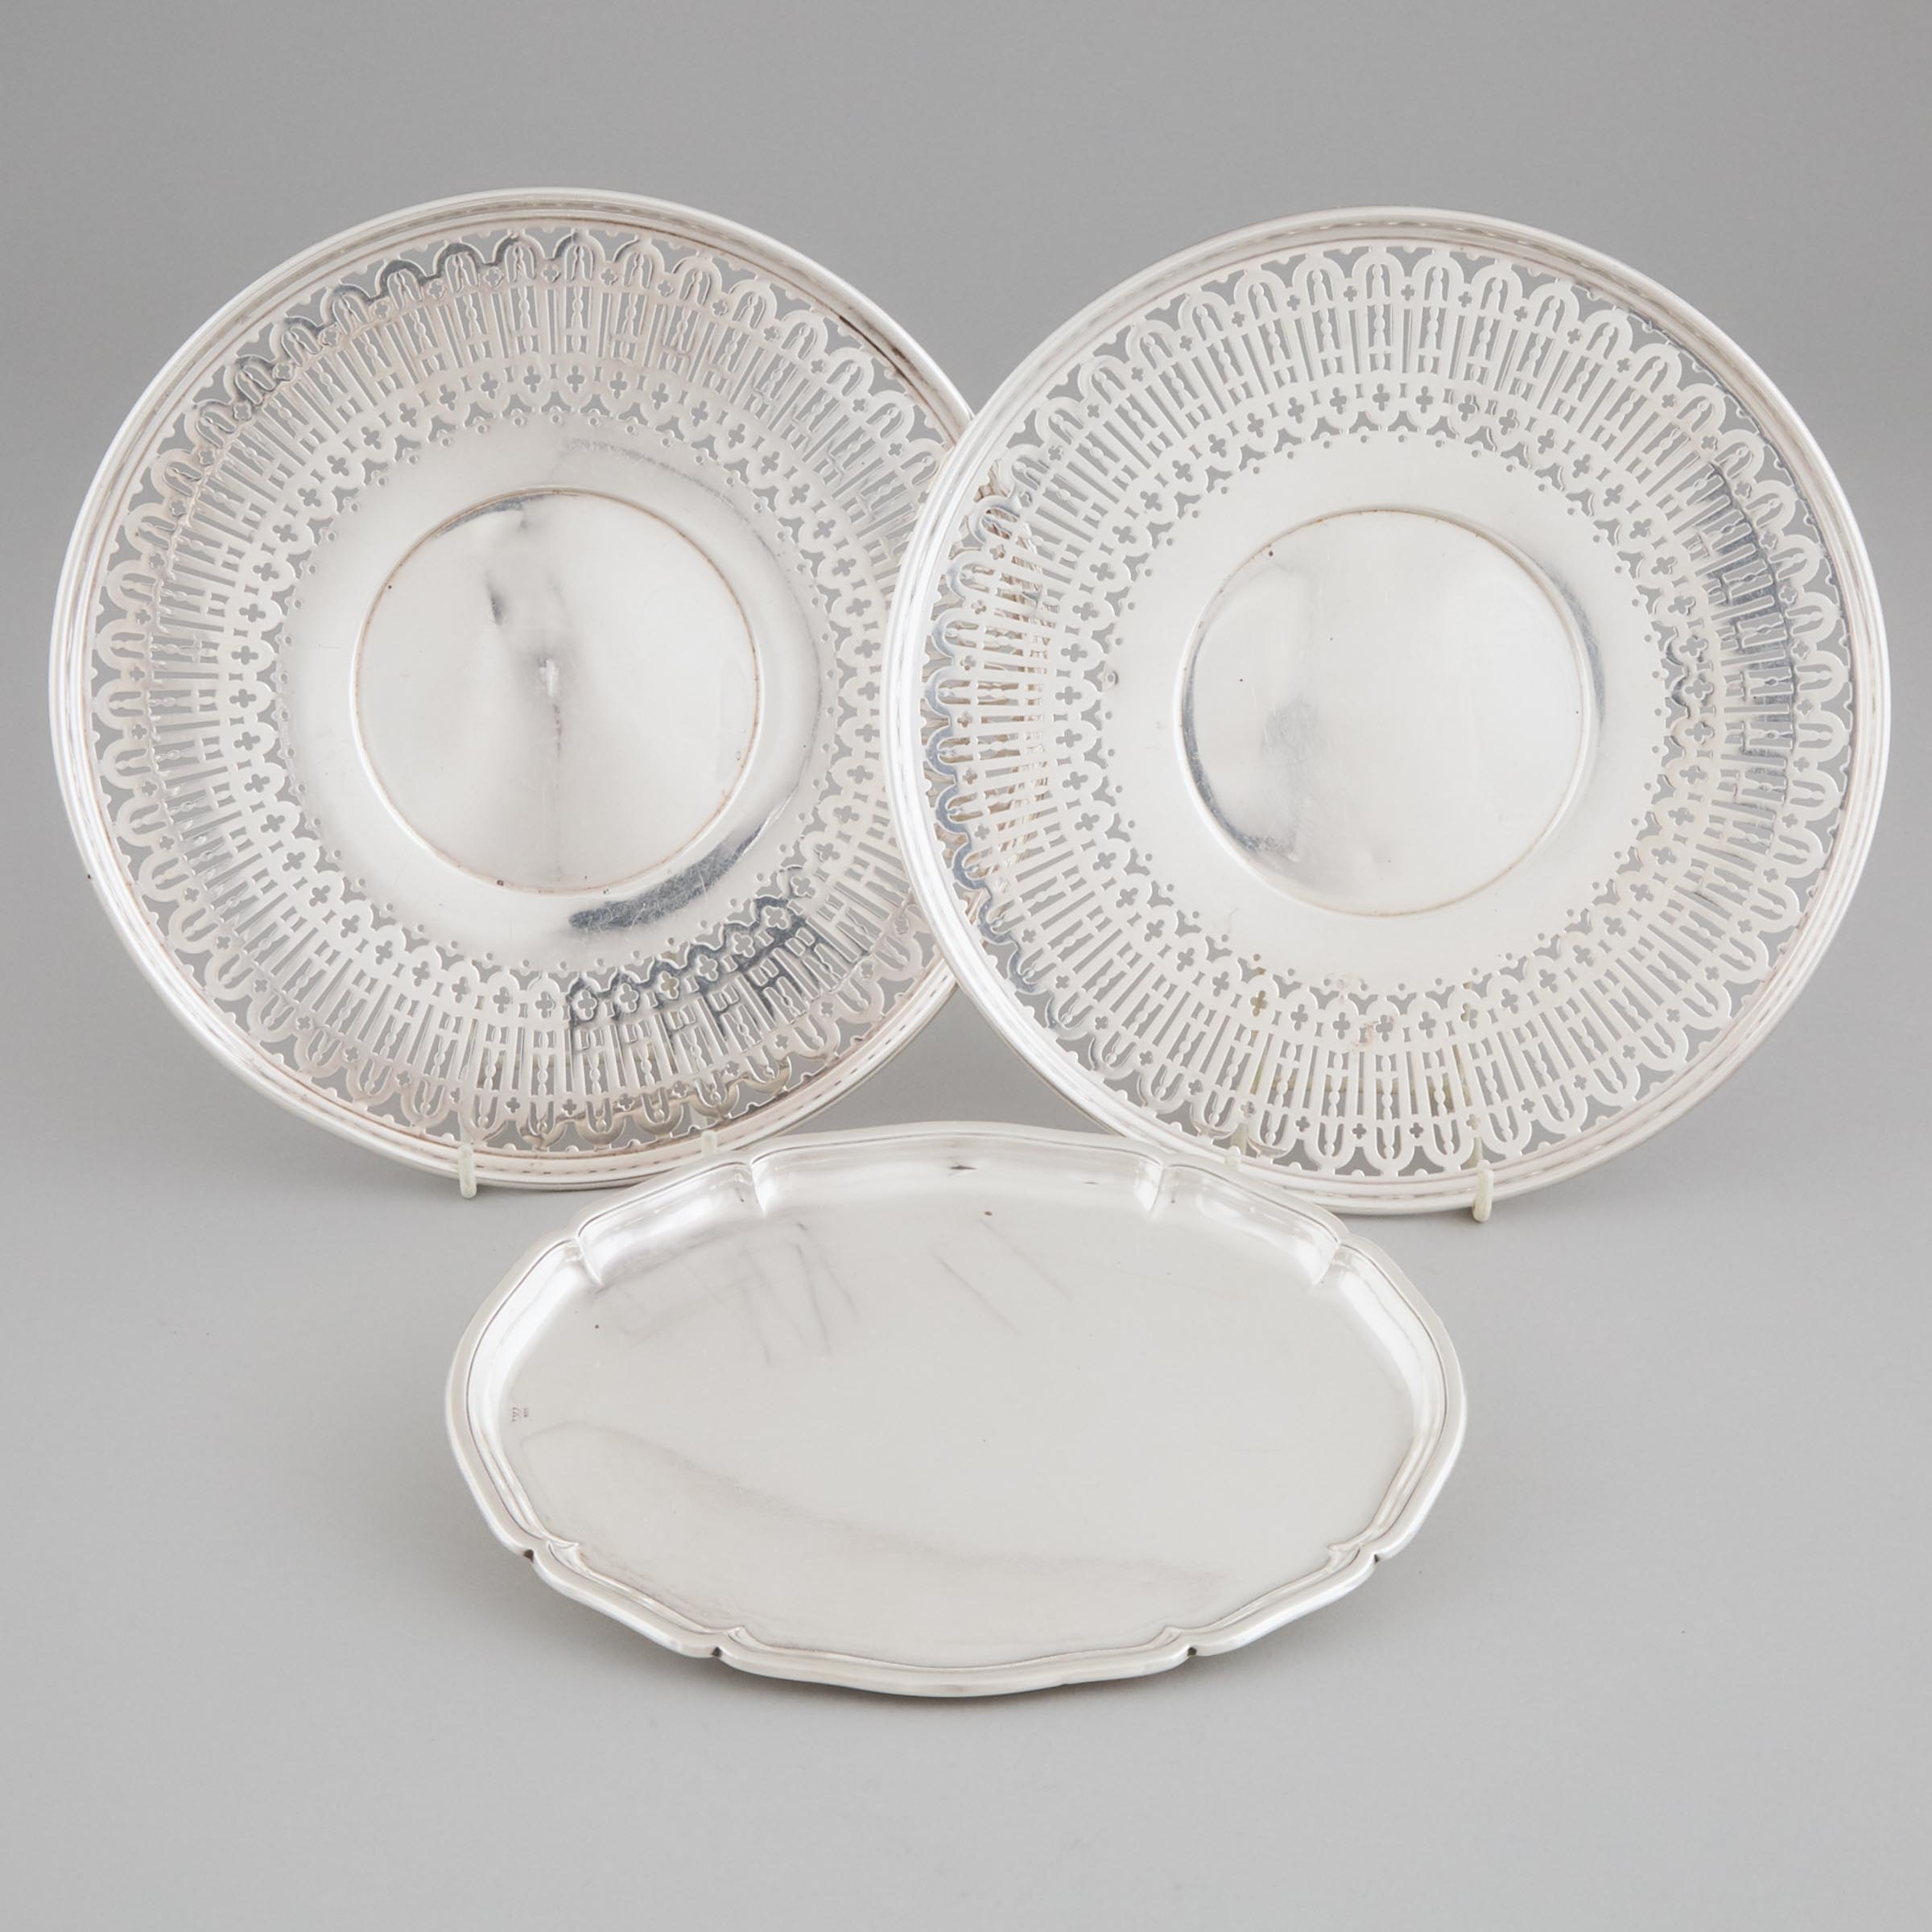 Pair of American Silver Cake Plates 3aba57